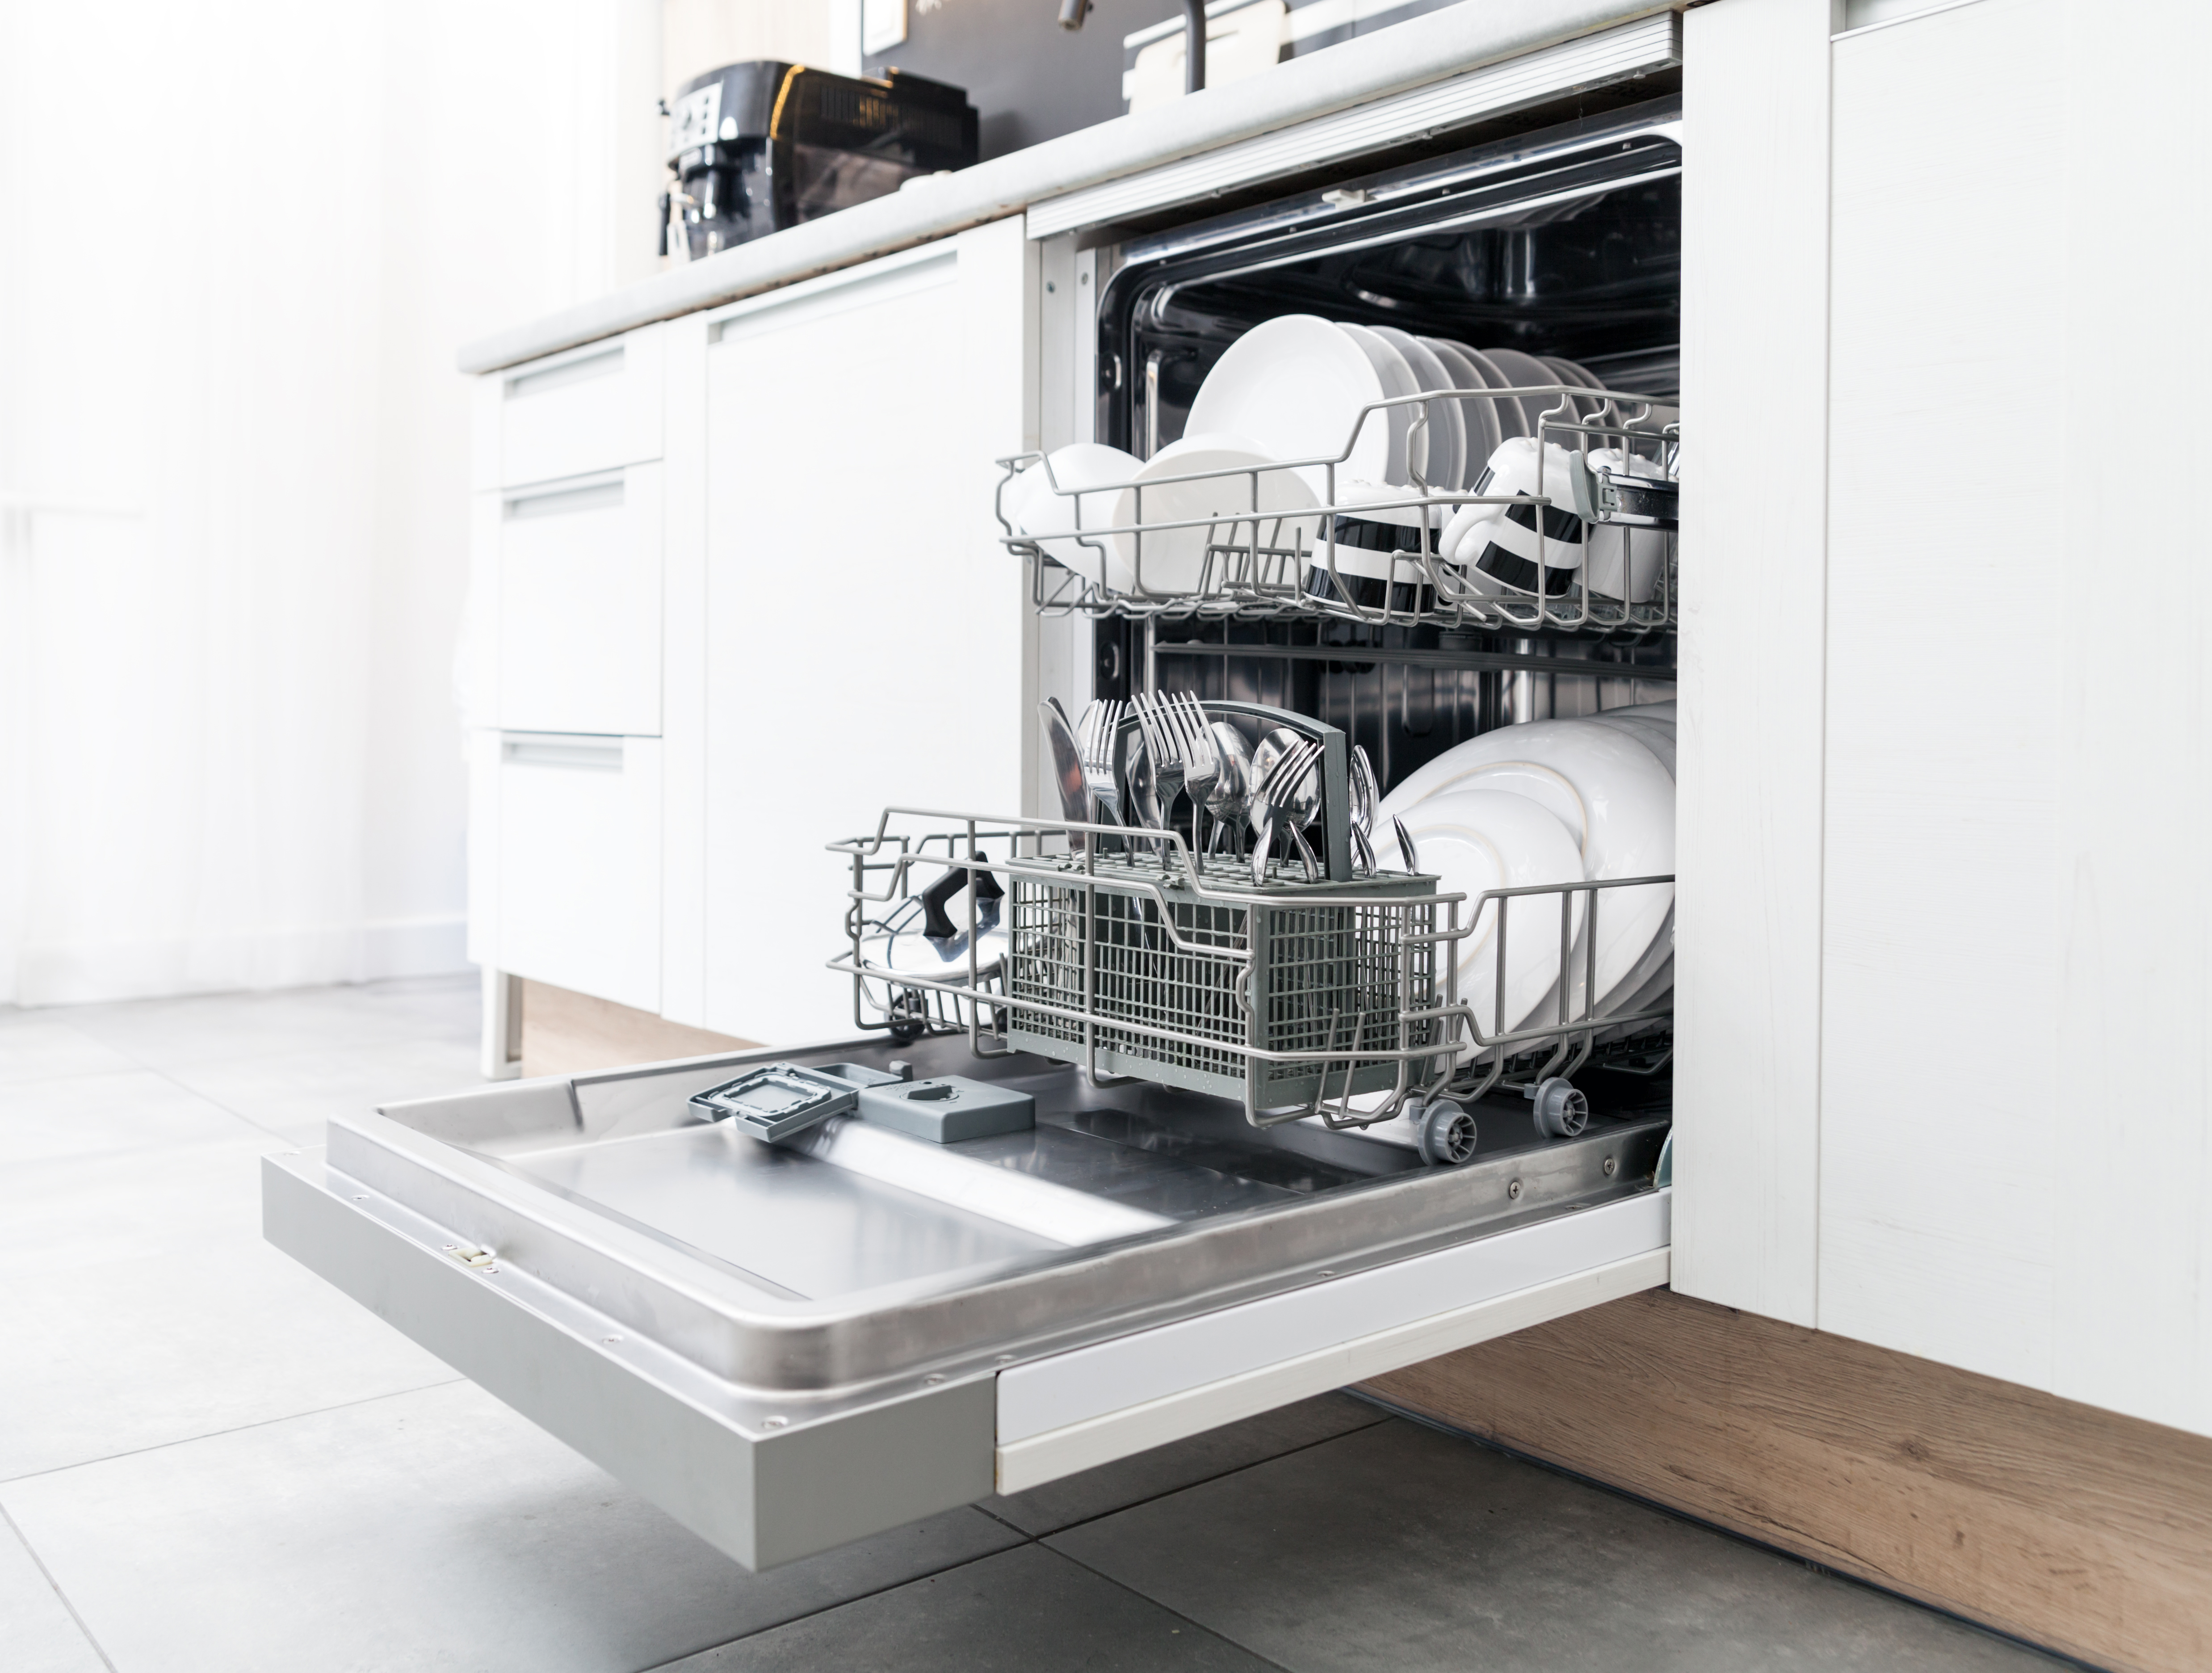 A fully loaded dishwasher | Source: Shutterstock